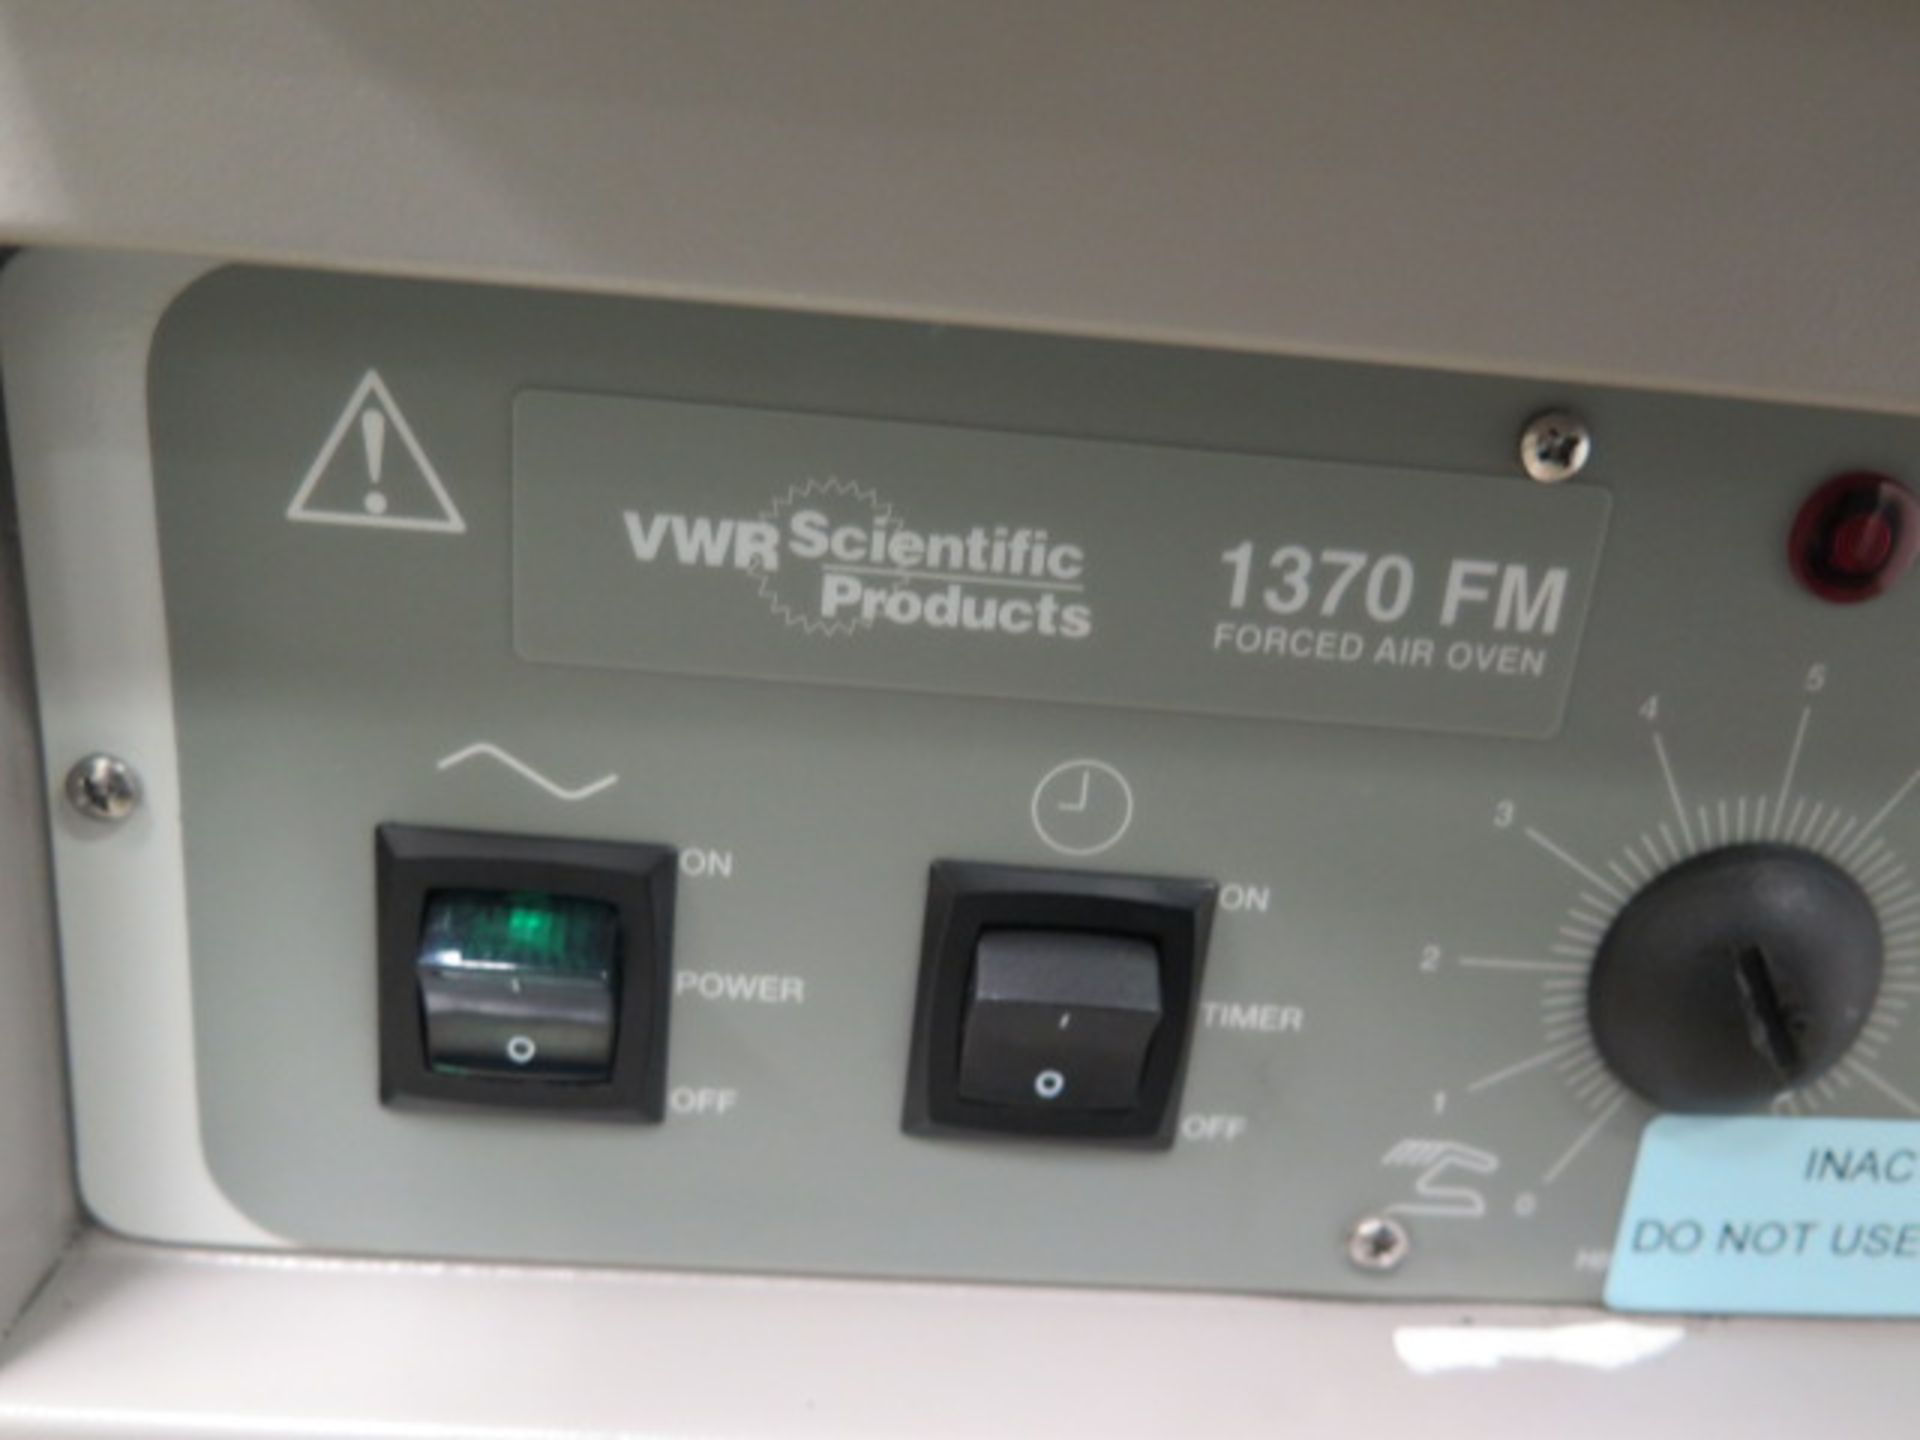 VWR mdl. 1370FM Lab Oven s/n 9071063 45-200 Degrees C (SOLD AS-IS - NO WARRANTY) - Image 7 of 7